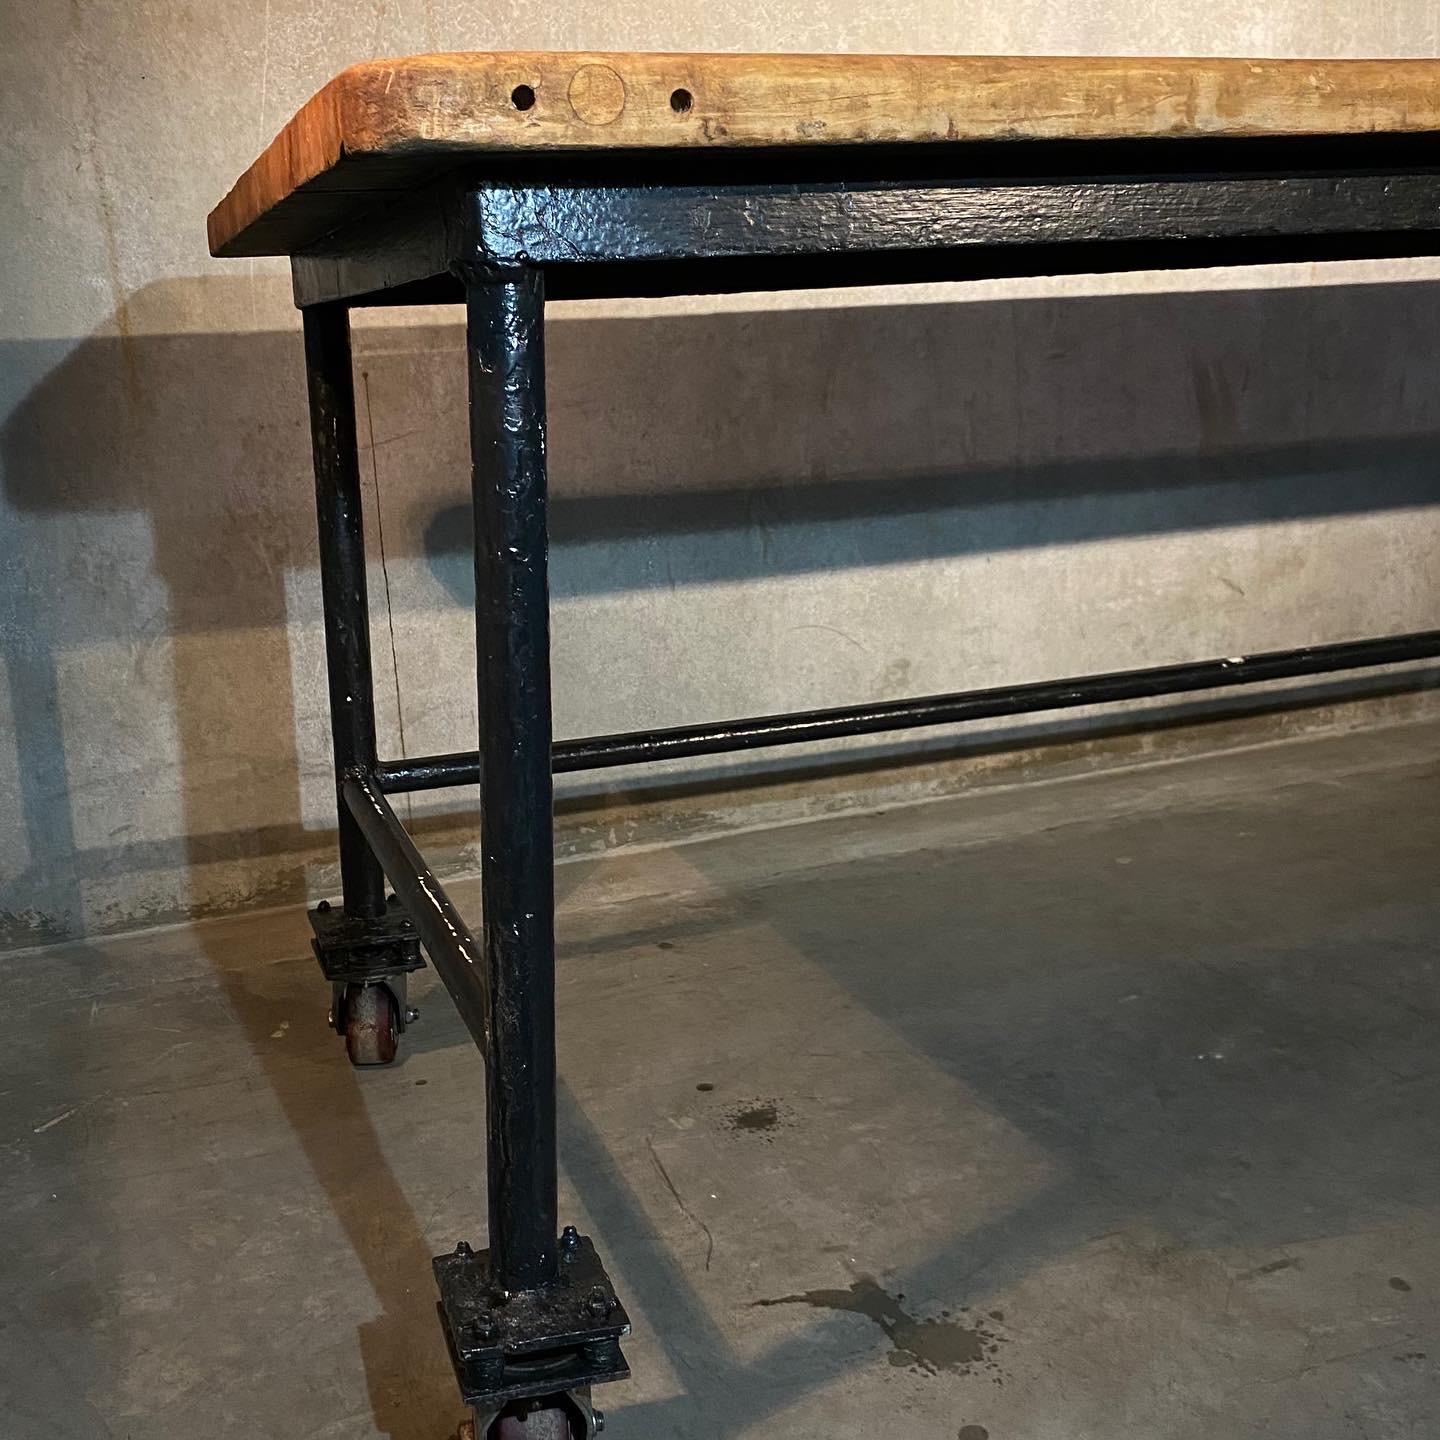 A very nice original table salvaged from a defunct bakery in BC.  This piece shows rolling casters,  solid top , old finish and support bar with open section for stools etc...

As found  from a local collection.